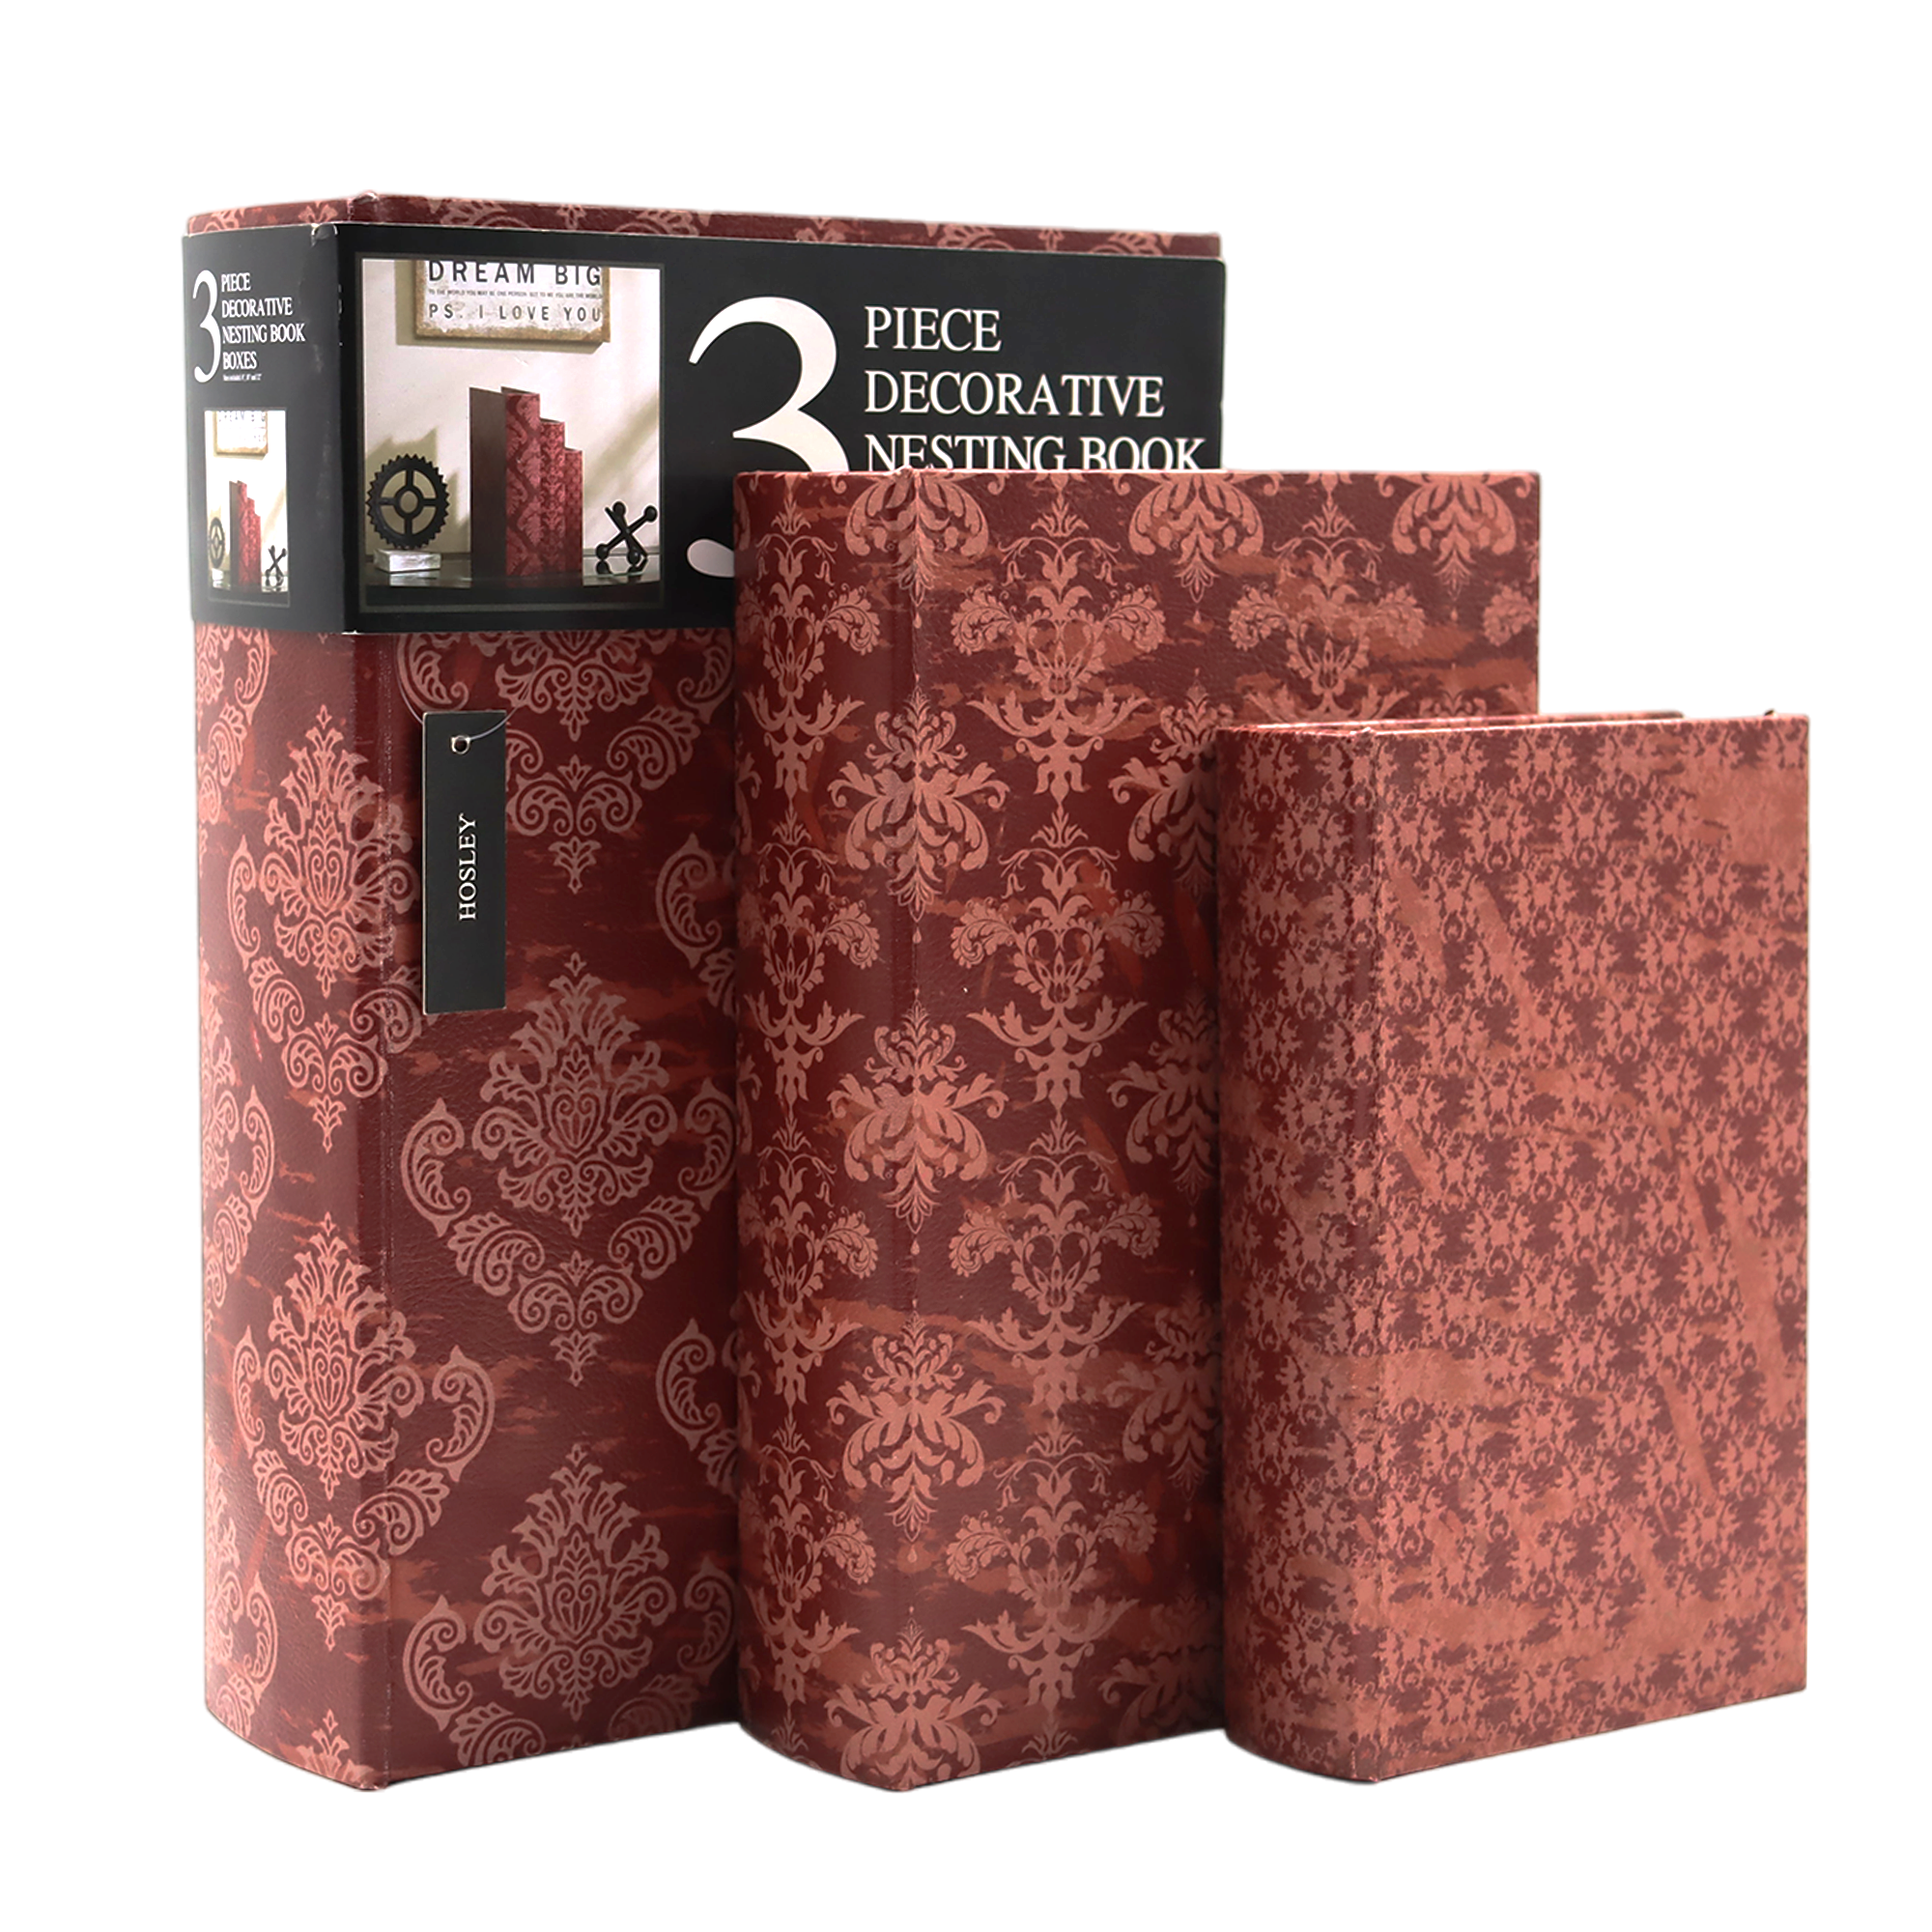 Hosley Home Wooden Storage Farmhouse Memory Book Boxes Set of 3, Red Brown & Gold Paisley - image 1 of 8